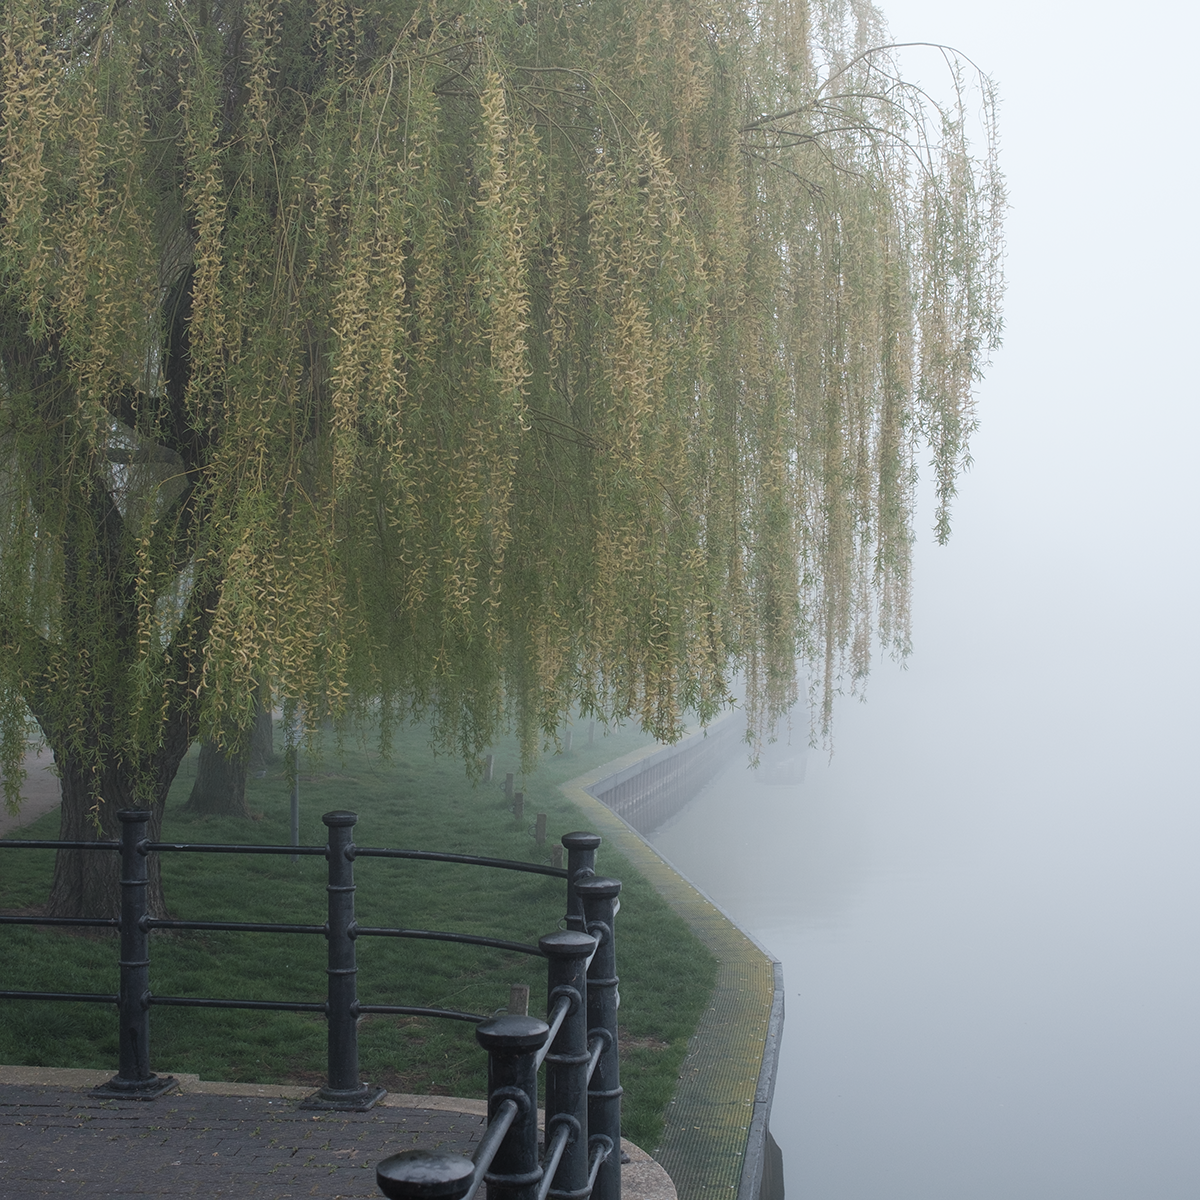 Willow in Mist image